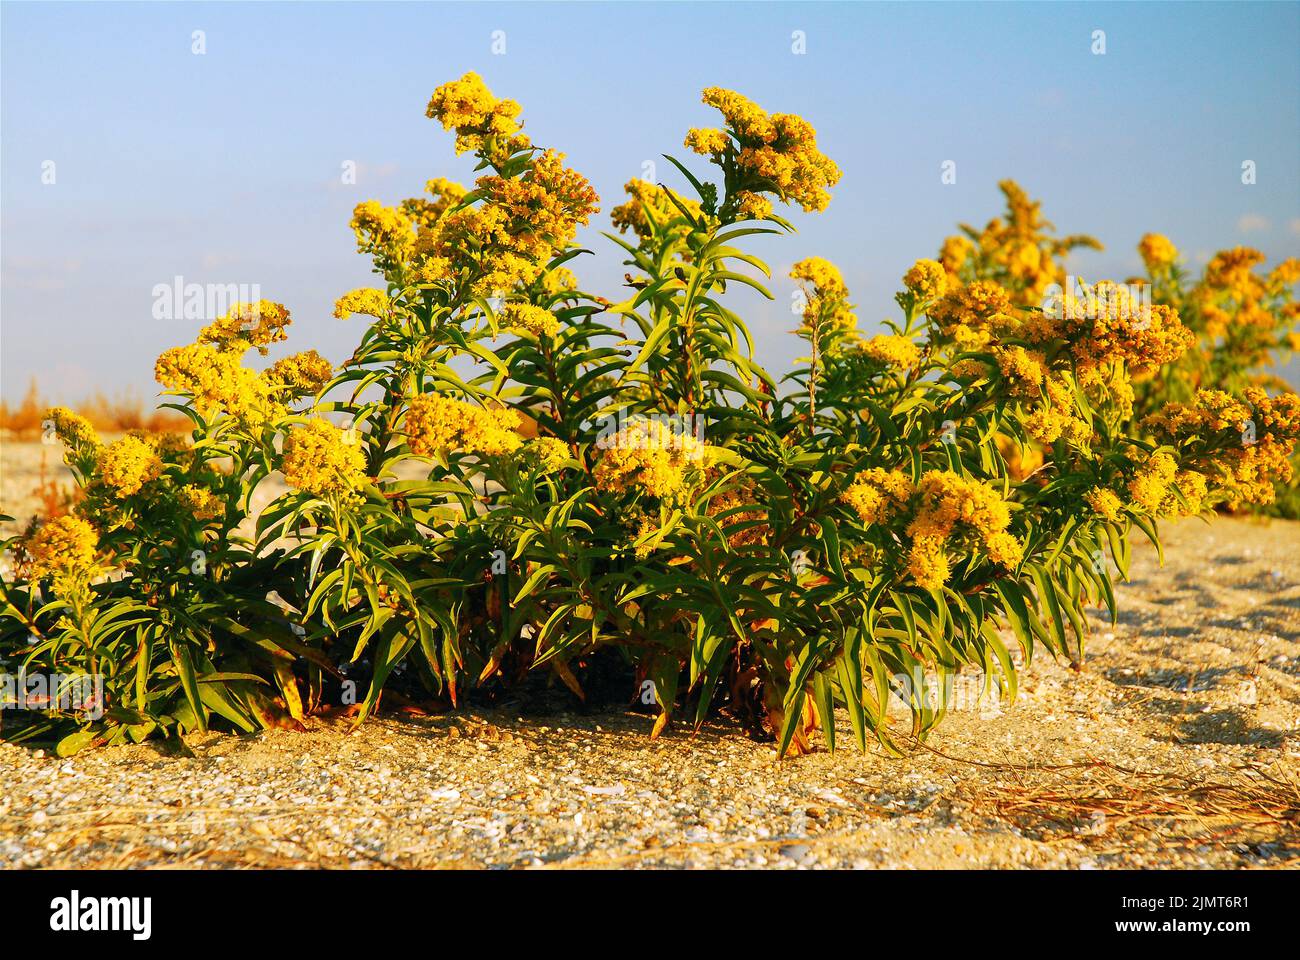 The small yellow buds of a goldenrod plant blooms along on the beach in early autumn on a sunny day near the shore Stock Photo